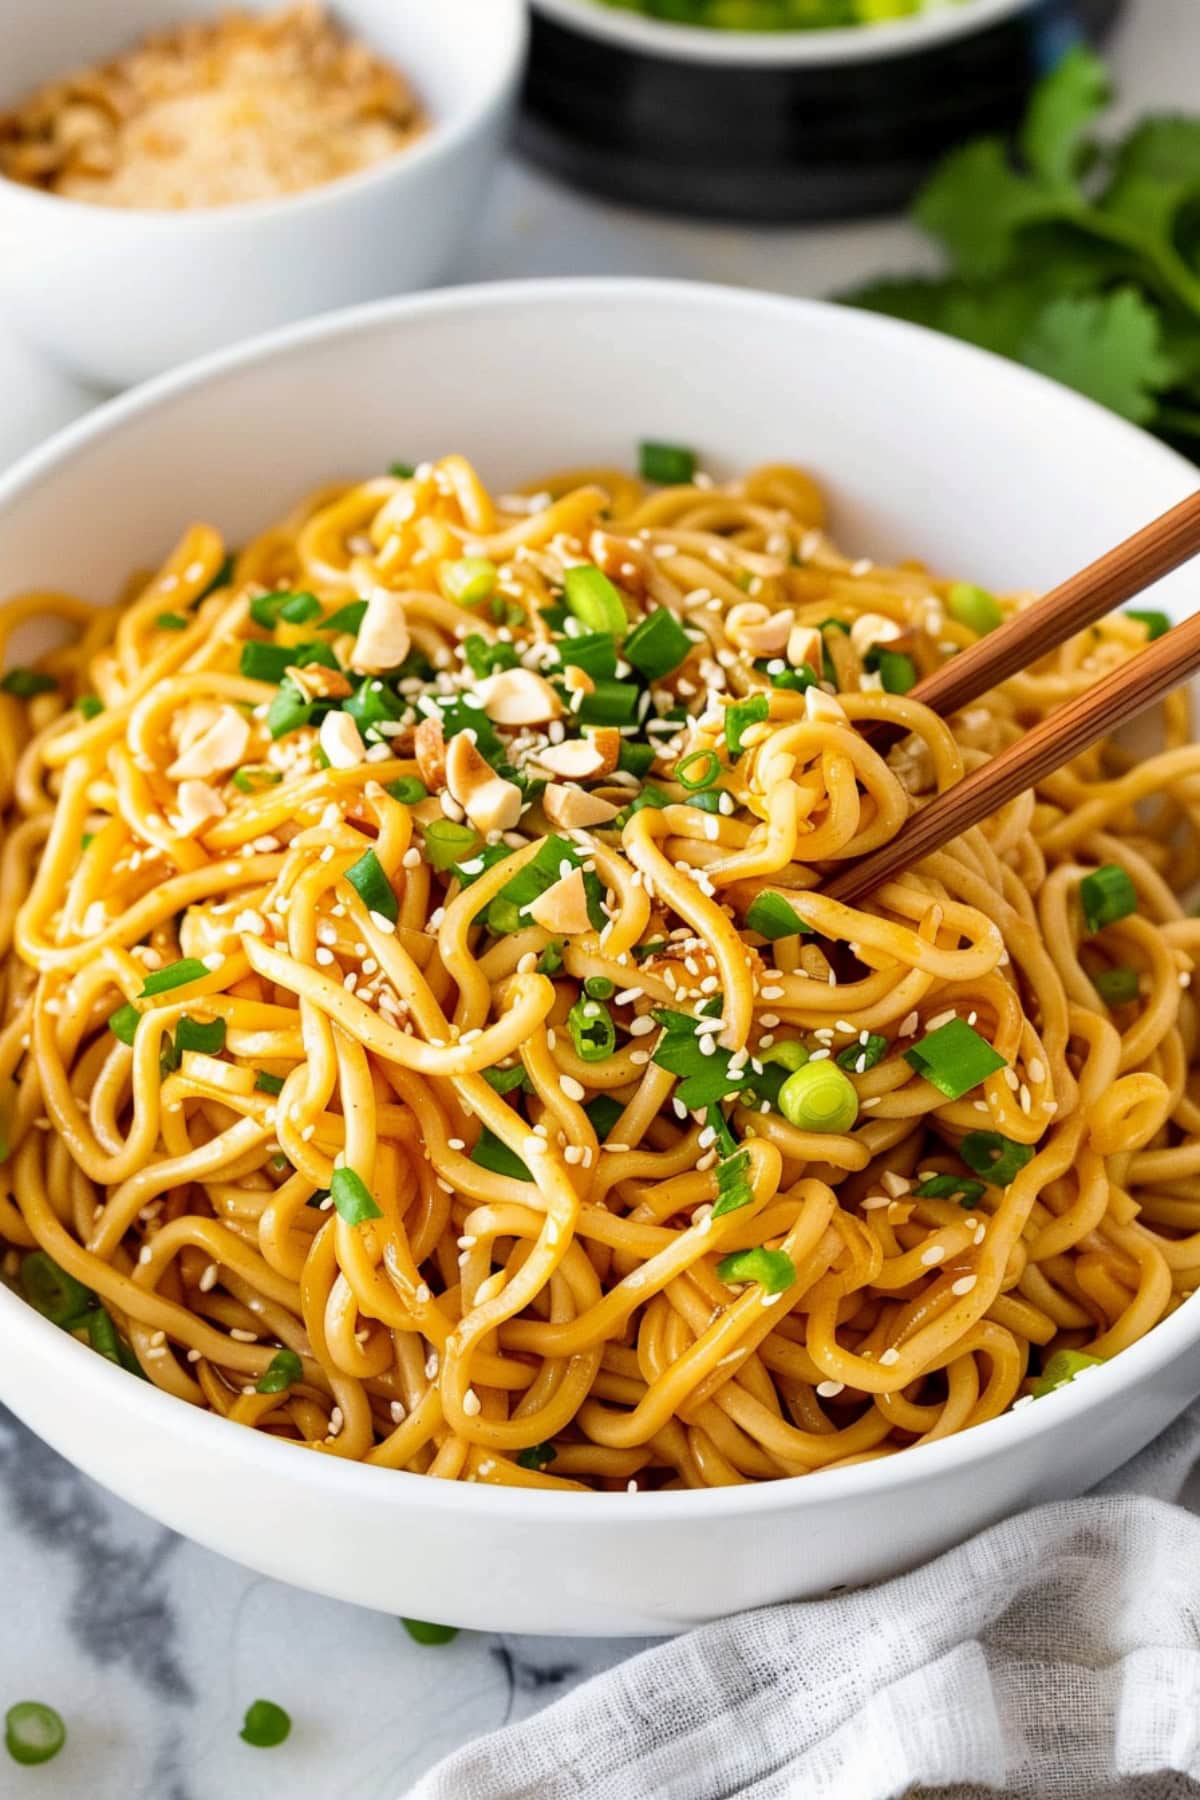 Flavorful sesame noodles with green onions and nuts in a bowl